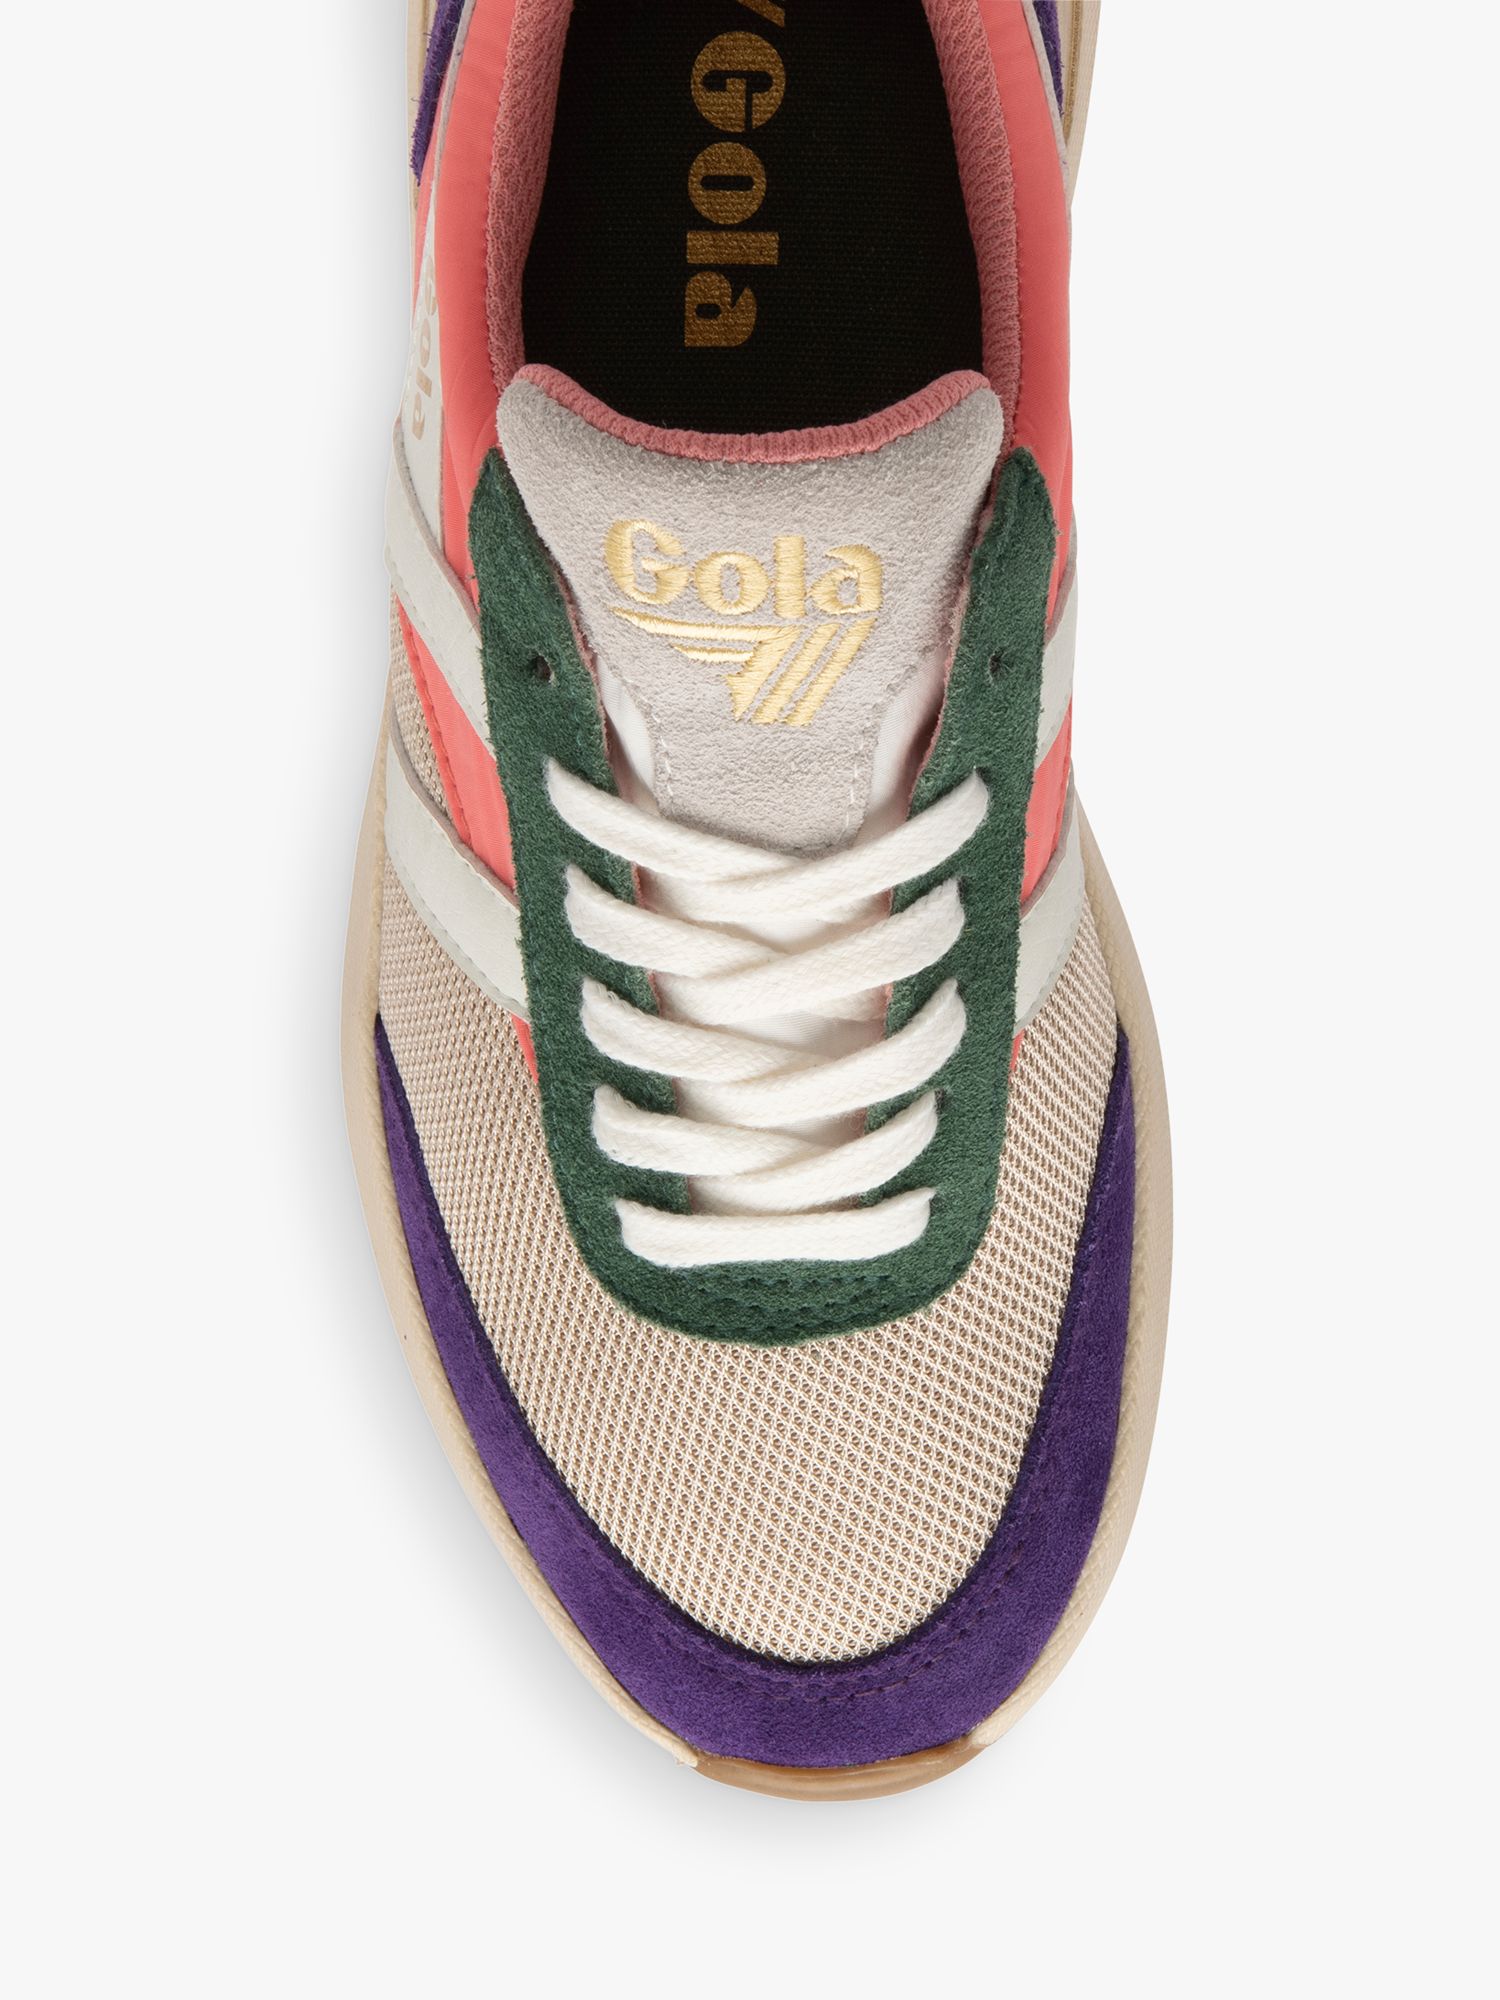 Buy Gola Classics Raven Lace Up Trainers, Wheat/Coral/Purple Online at johnlewis.com